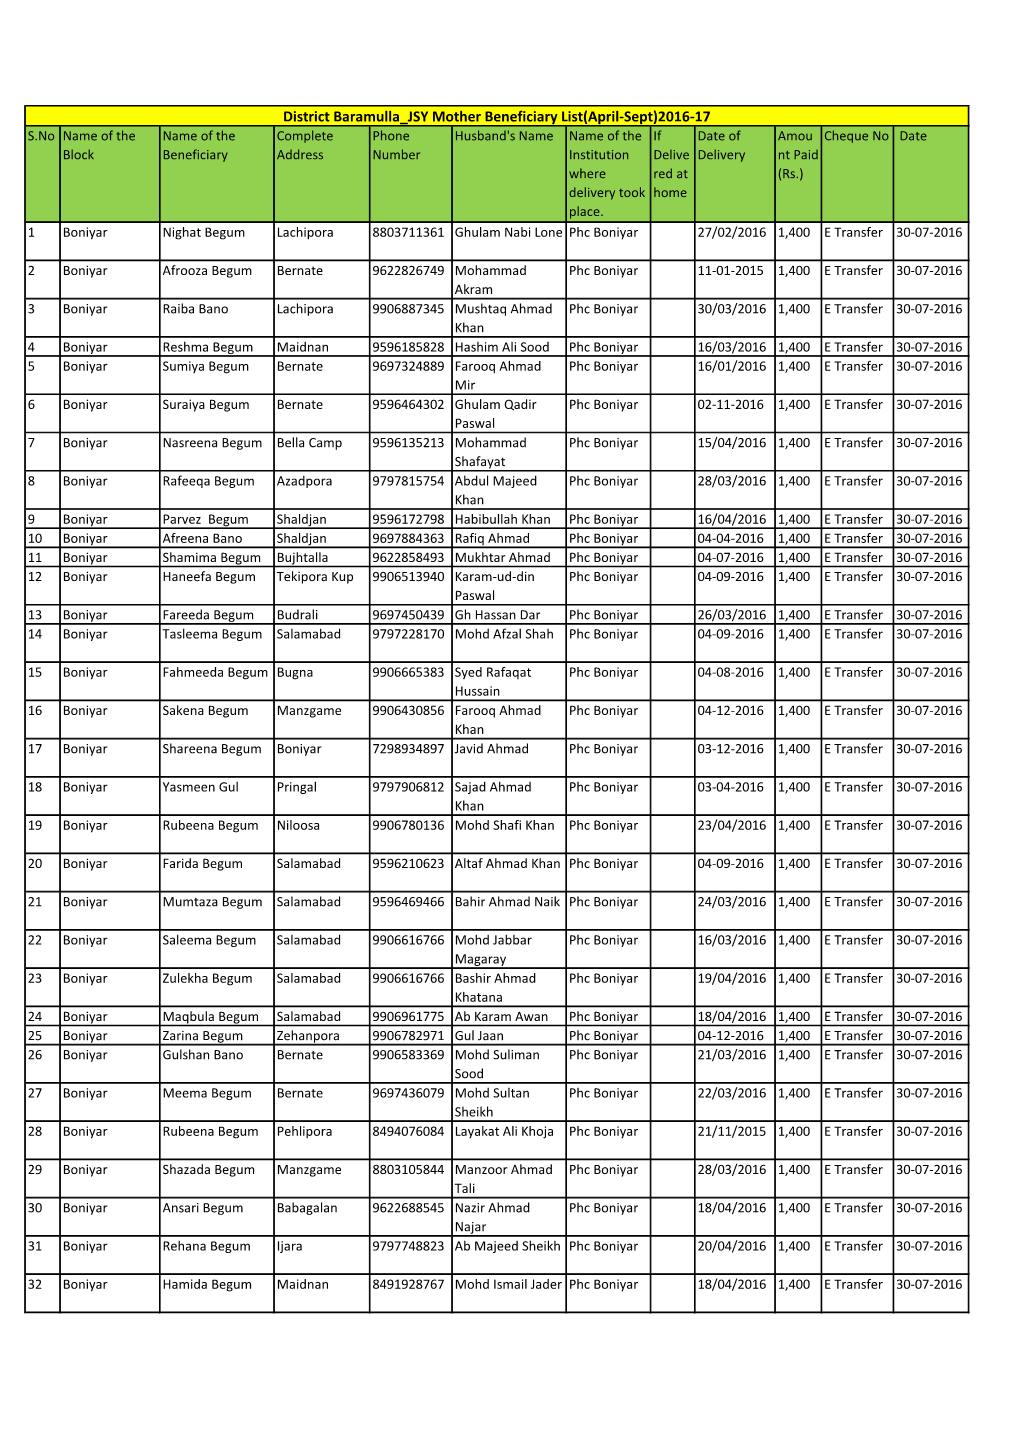 District Baramulla JSY Mother Beneficiary List(April-Sept)2016-17